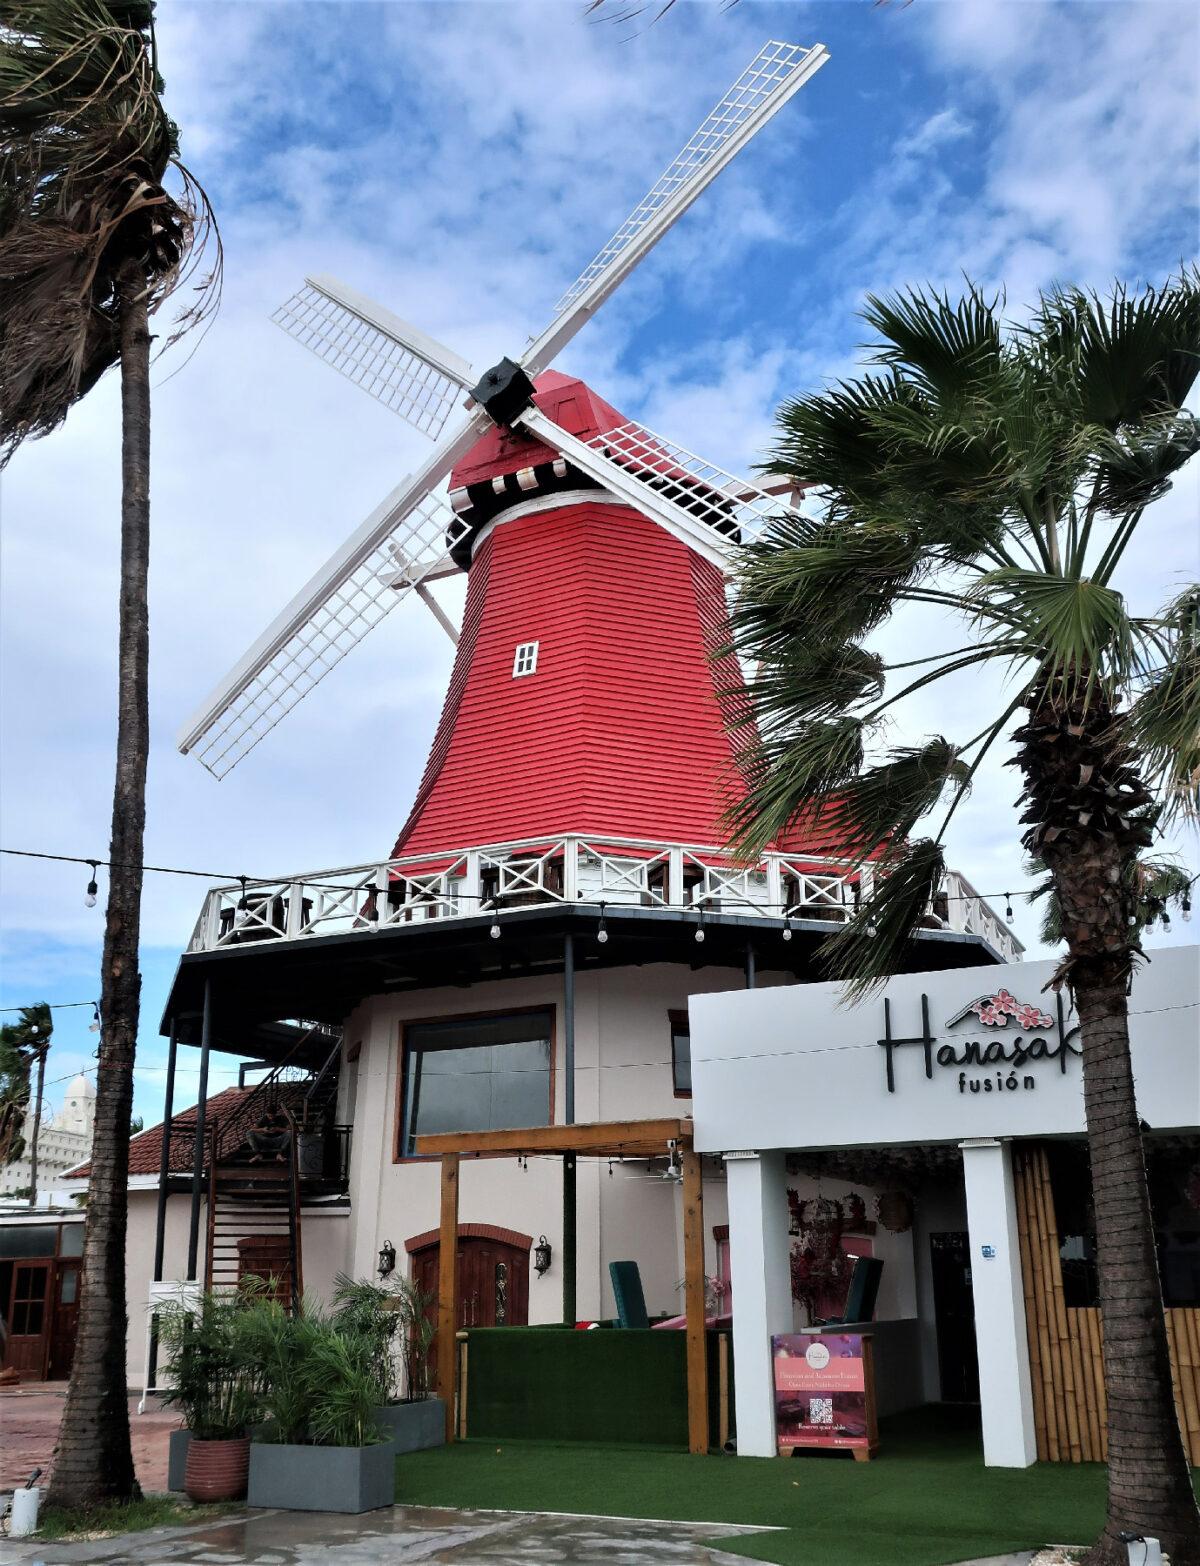 The Old Windmill in Aruba was first built in the Netherlands, then taken apart and reassembled in Aruba. (Victor Block)